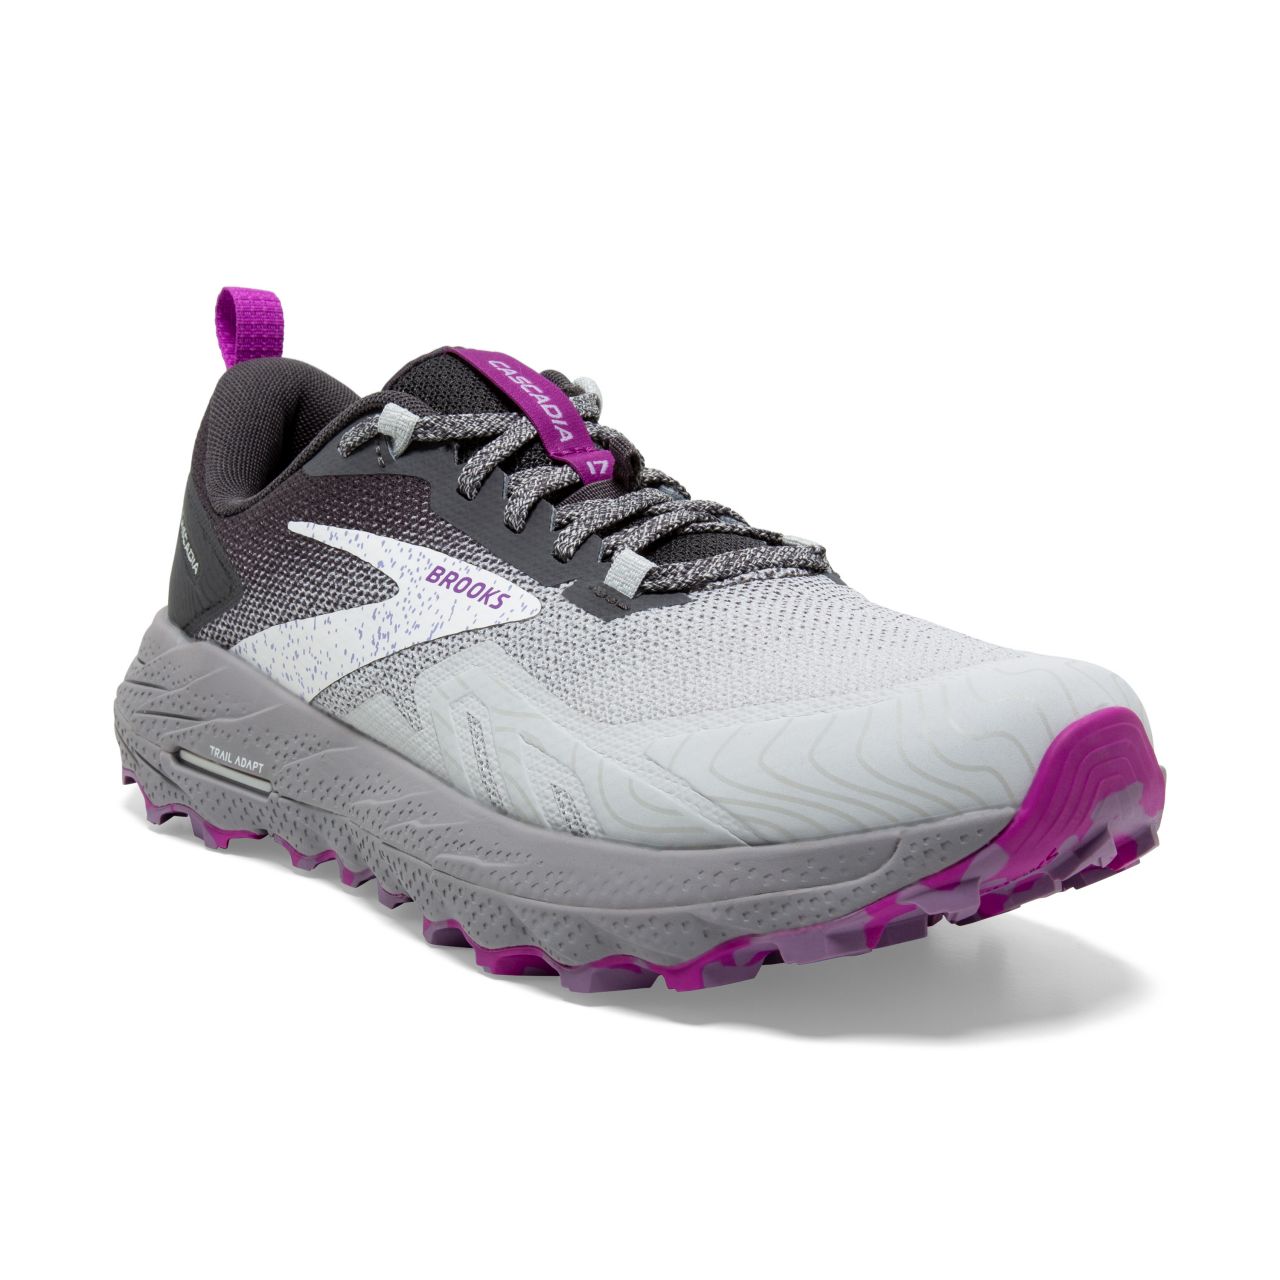 BROOKS CASCADIA 17 OYSTER ET BLACKENED PEARL Chaussures de trail